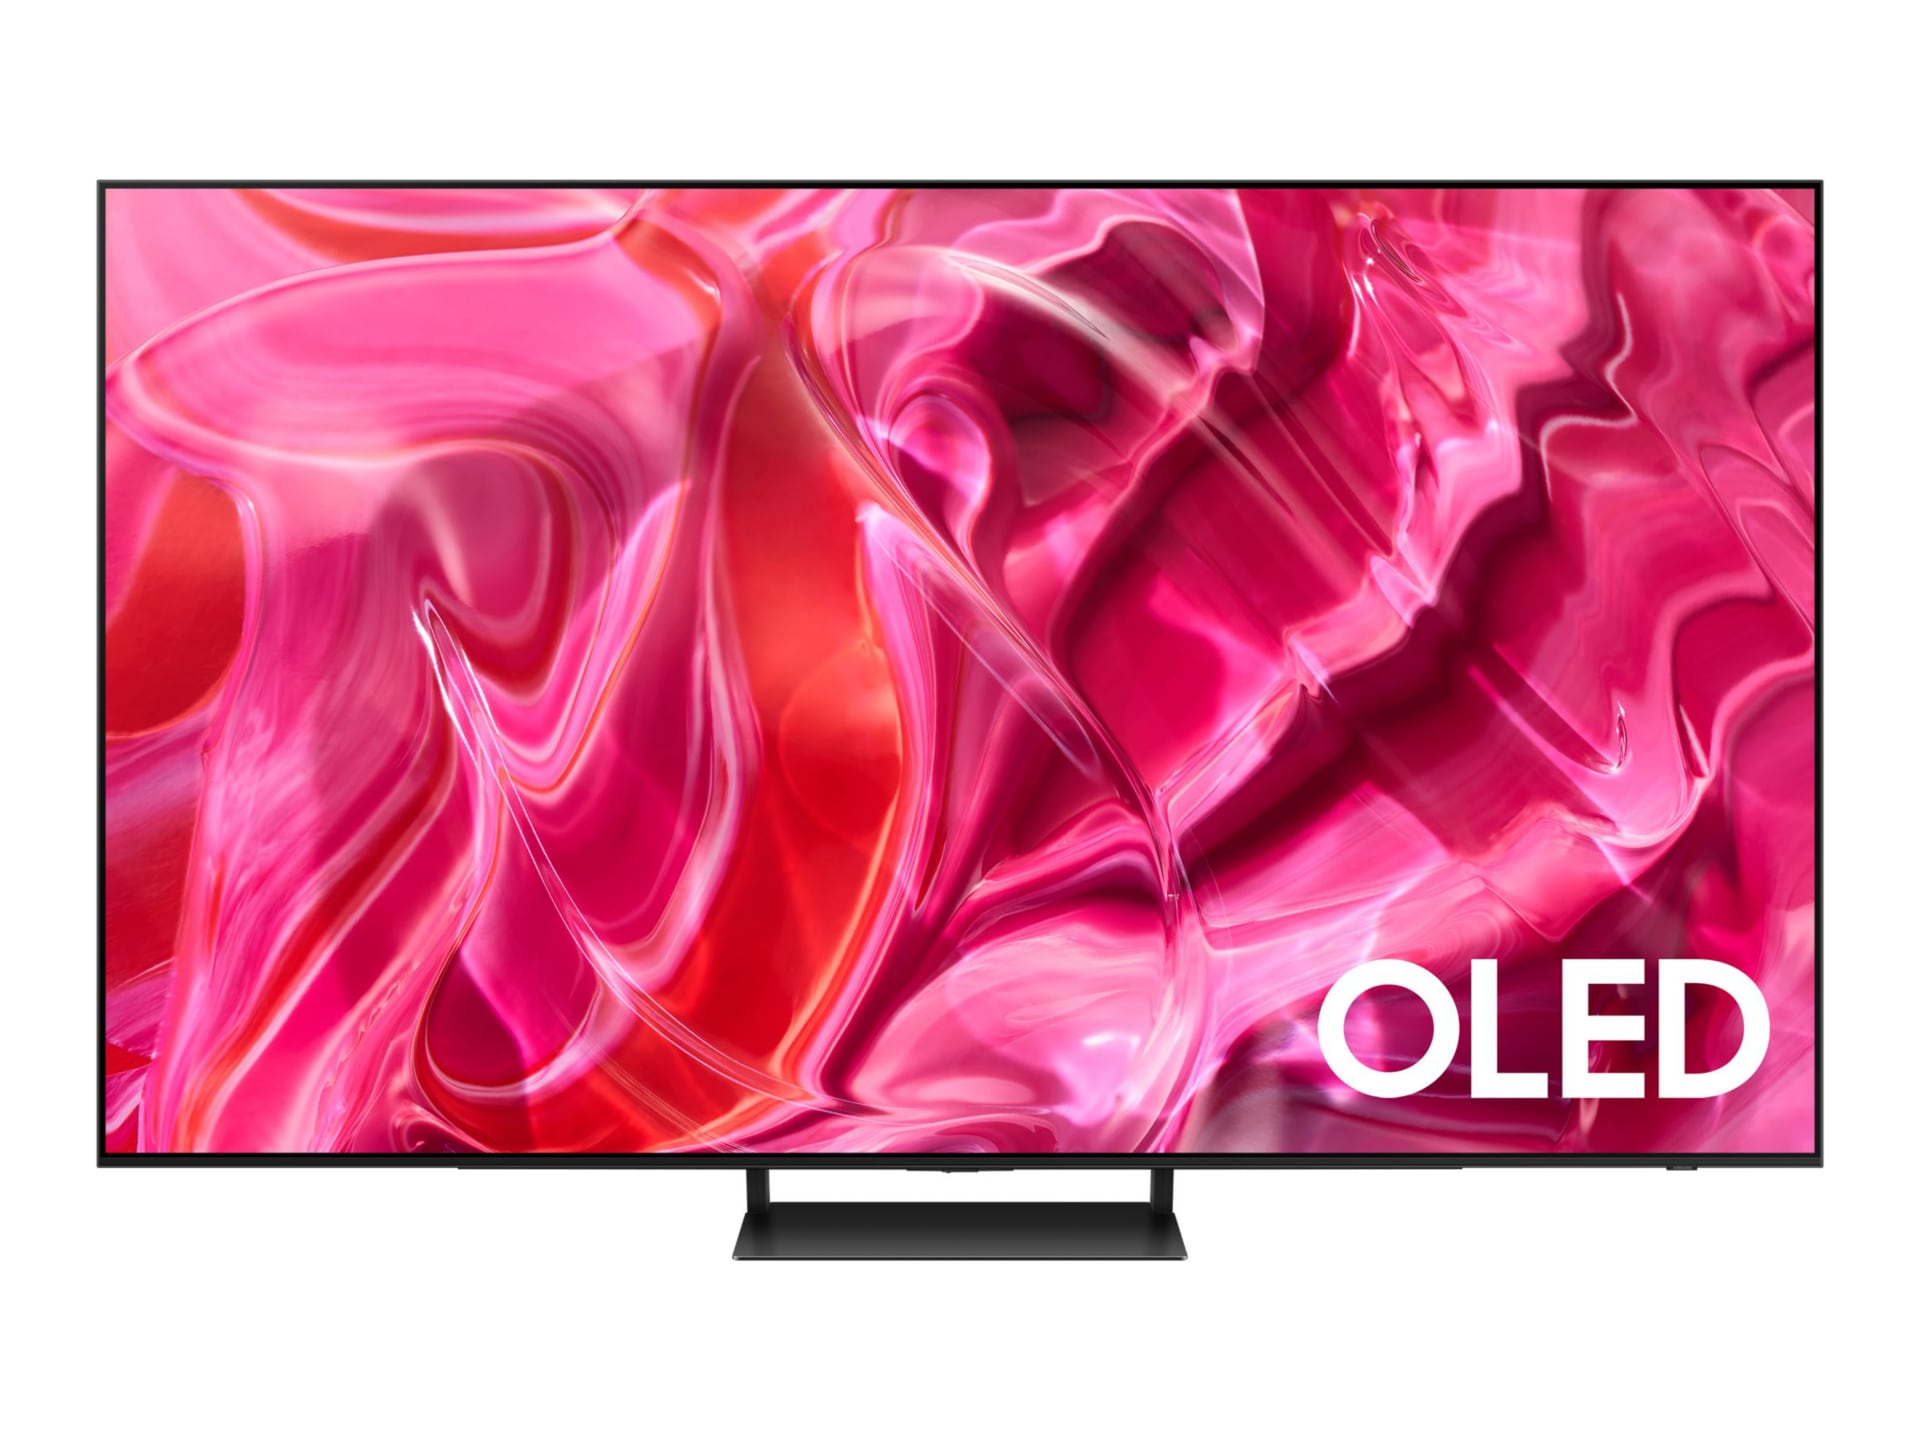 I Bought My First OLED TV - 4K 120Hz Display 😍 